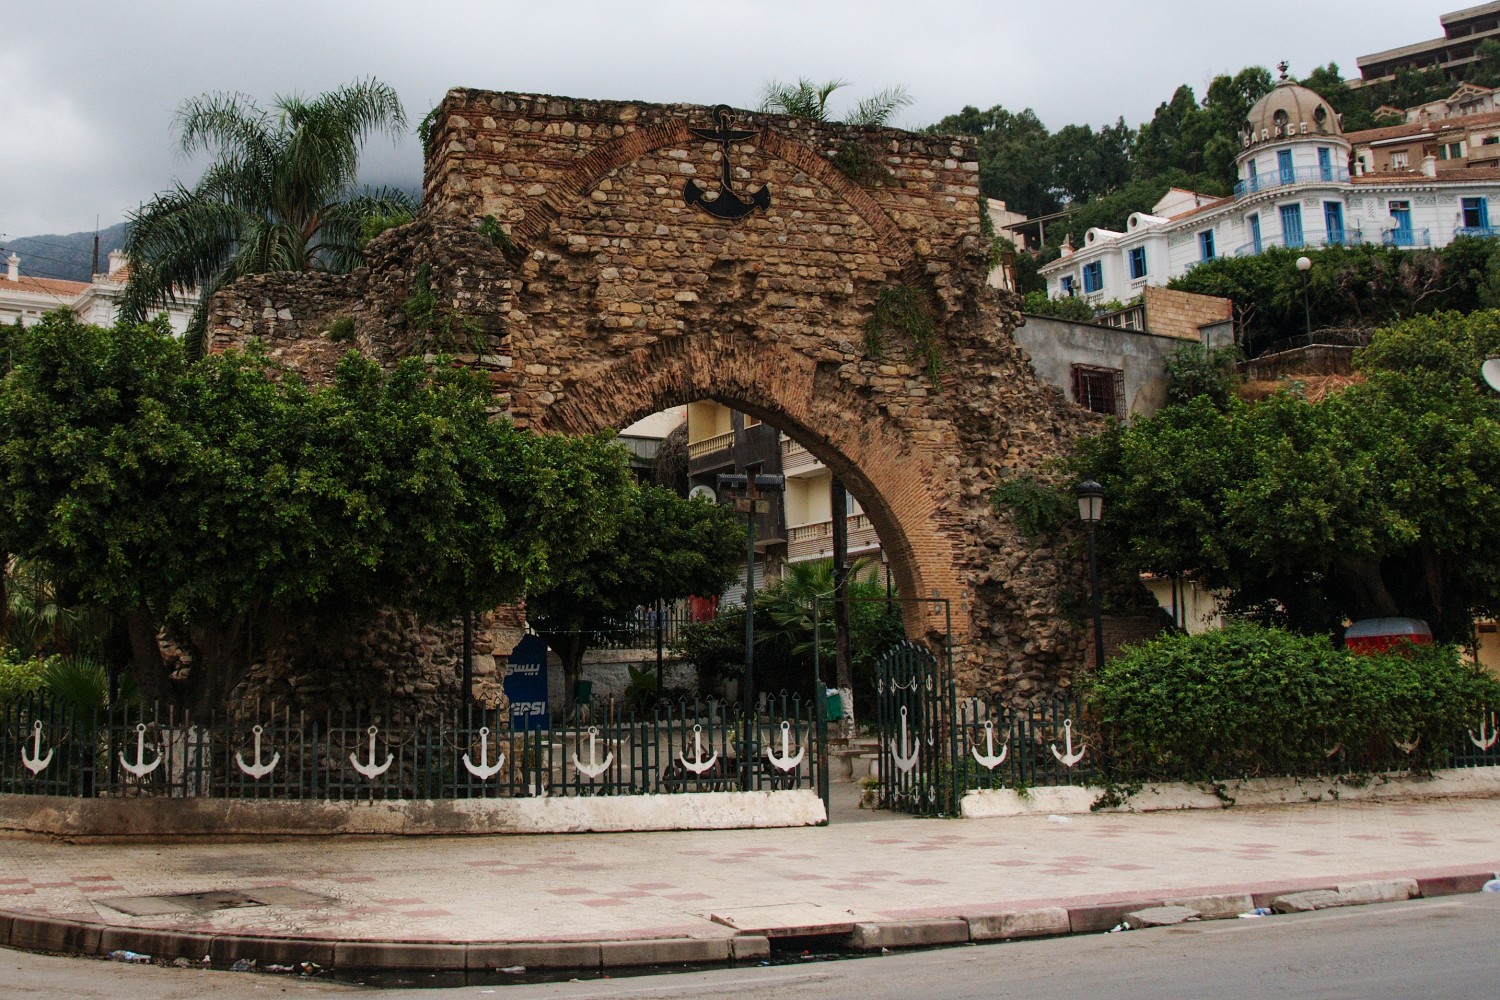 Frontal view of Bab al-Bahr